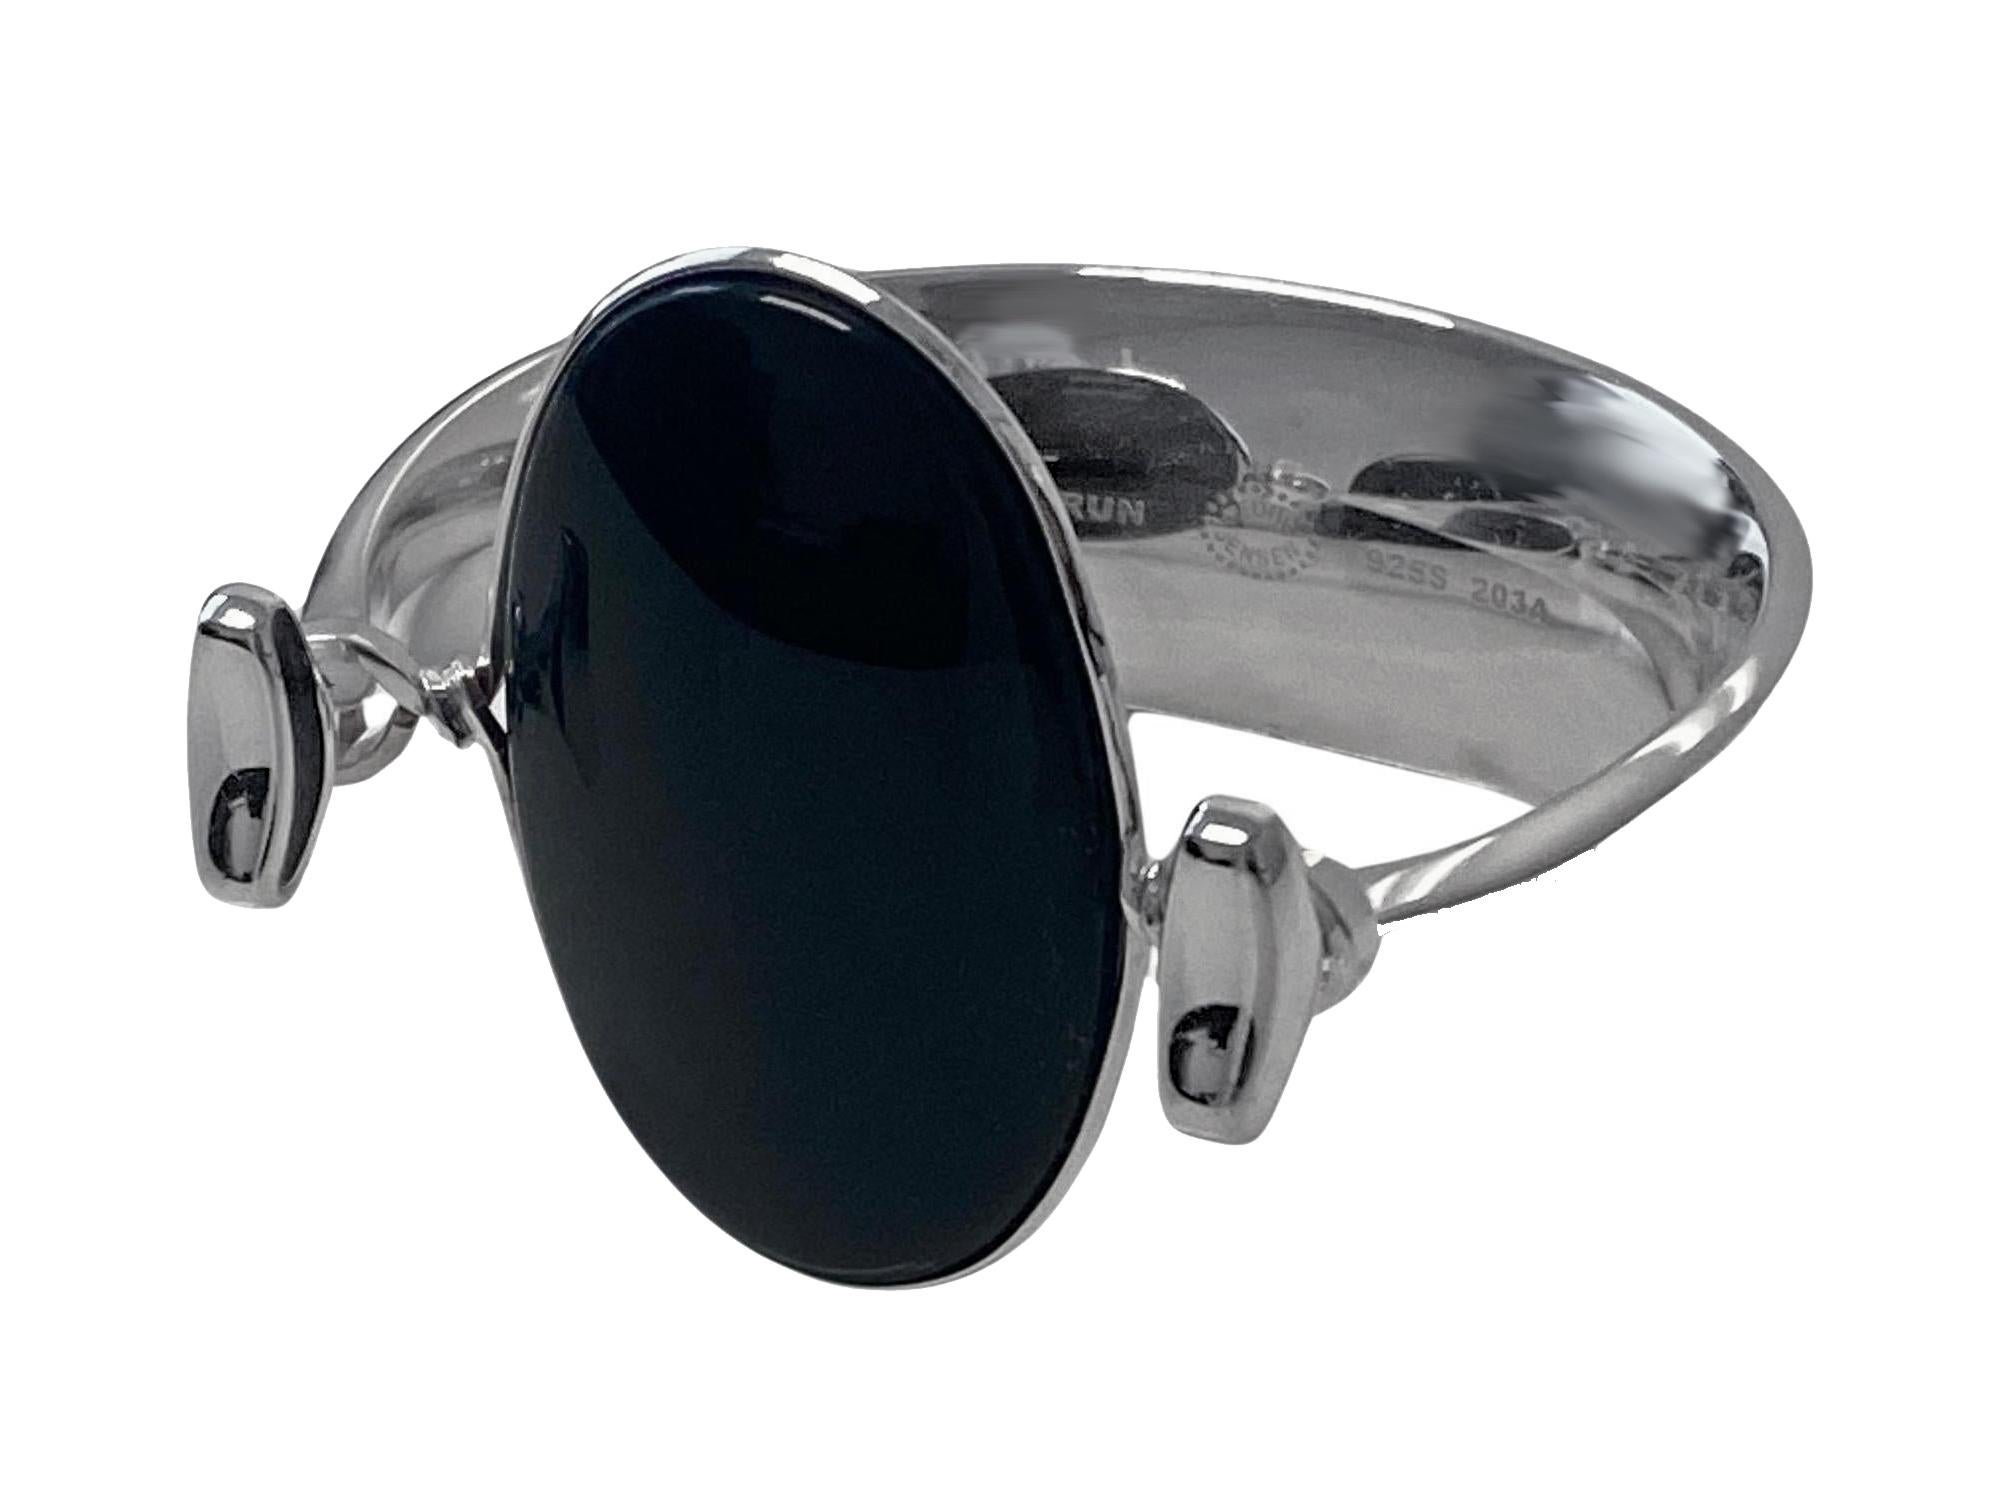 Georg Jensen Bangle with black onyx model # 203A Designed by Vivianna Torun Bülow-Hübe C.1969. Fits most wrists up to 6.5 inches, tension clamp opening. Cabochon polished onyx gauges approximately: 4.50 x 3.00 cm. Stamped with: Georg Jensen (oval